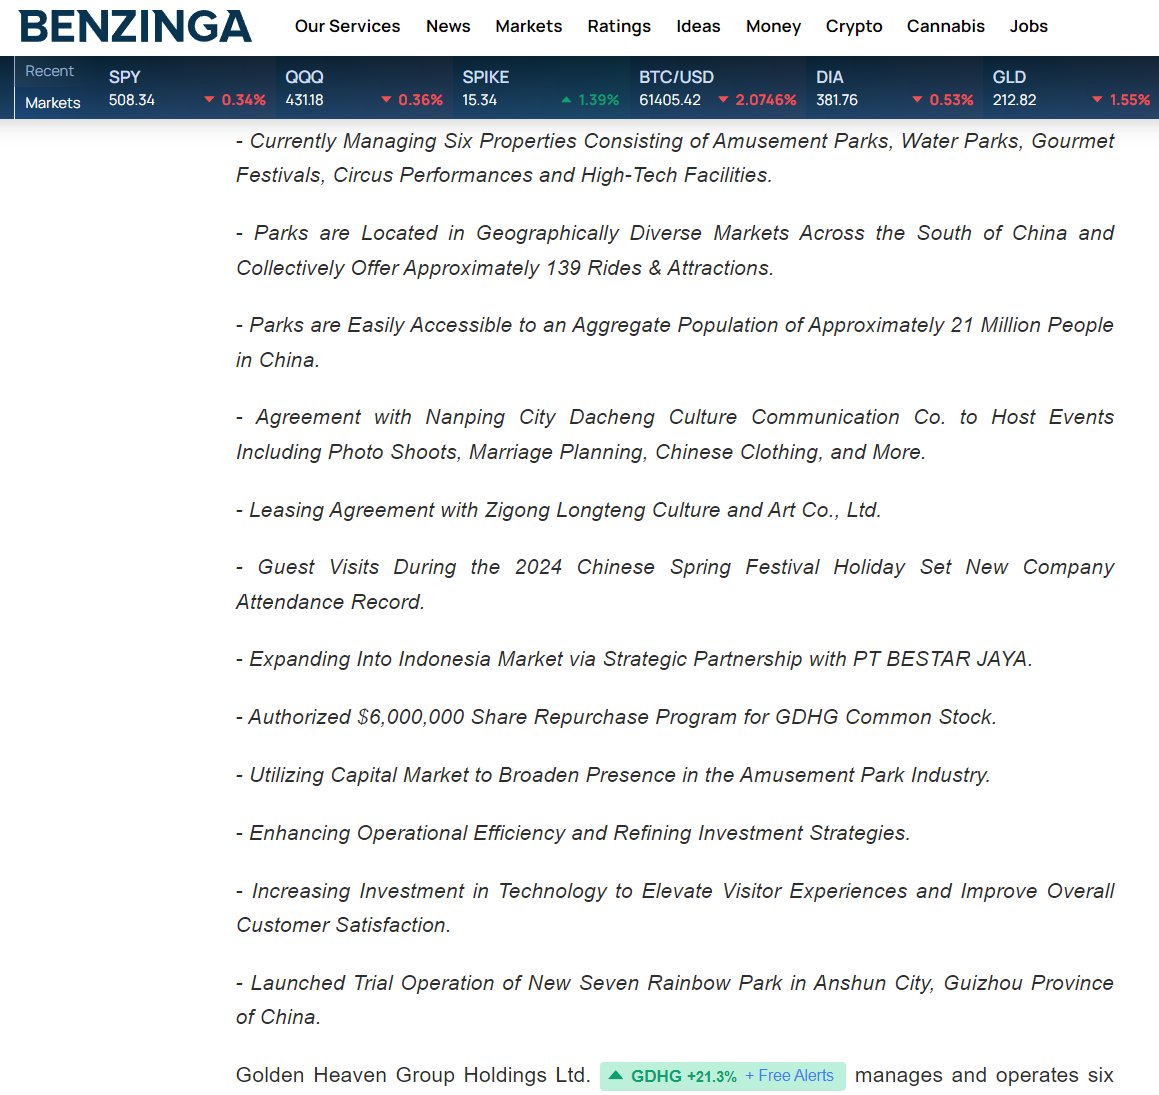 $GDHG - Benzinga.com 'New Agreements Signed for Diverse Business Opportunities Plus Expansion into Indonesia with 30-50 New Amusement Parks' @Nasdaq benzinga.com/pressreleases/… via @Benzinga #amusementparks #profitable #revenue 

$GDHG $DIS $FUN $CMCSA $SIX